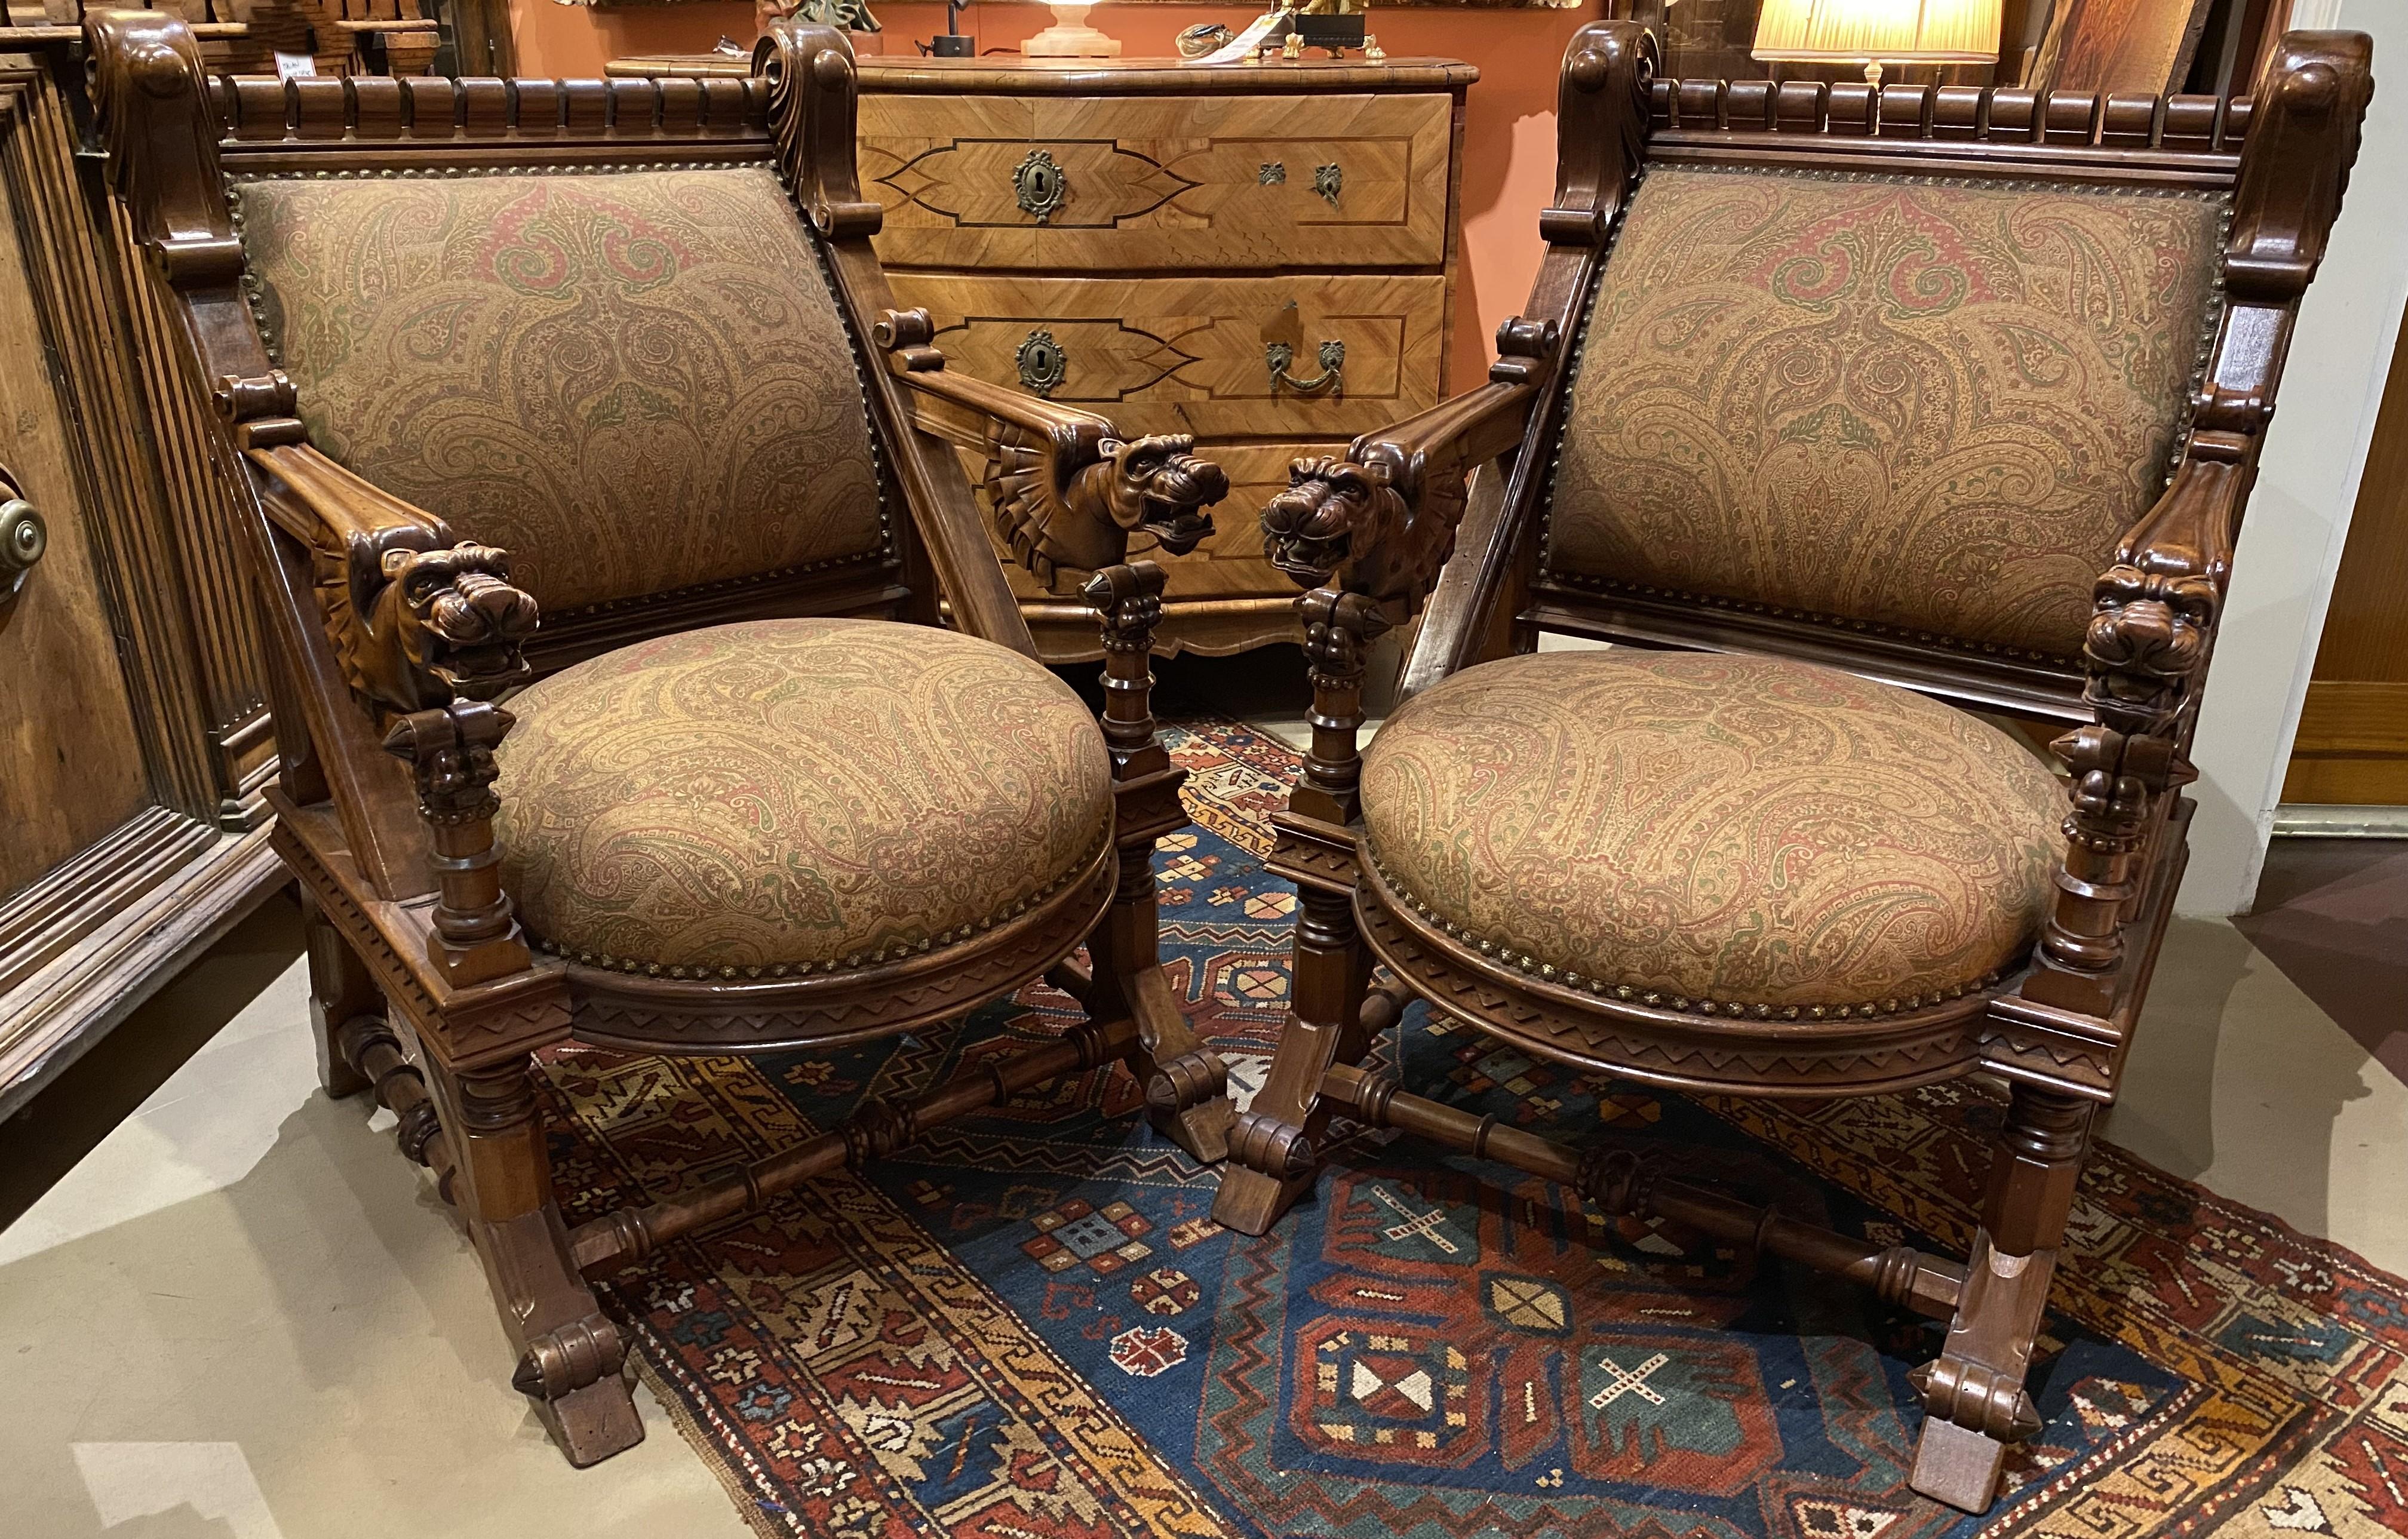 A fine pair of walnut heavily carved arm chairs with griffin arms and fresh Paisley upholstery in browns and reds, with beautiful scrolled & geometric detail. The chairs date to the late 19th century and are in very good condition, with minor